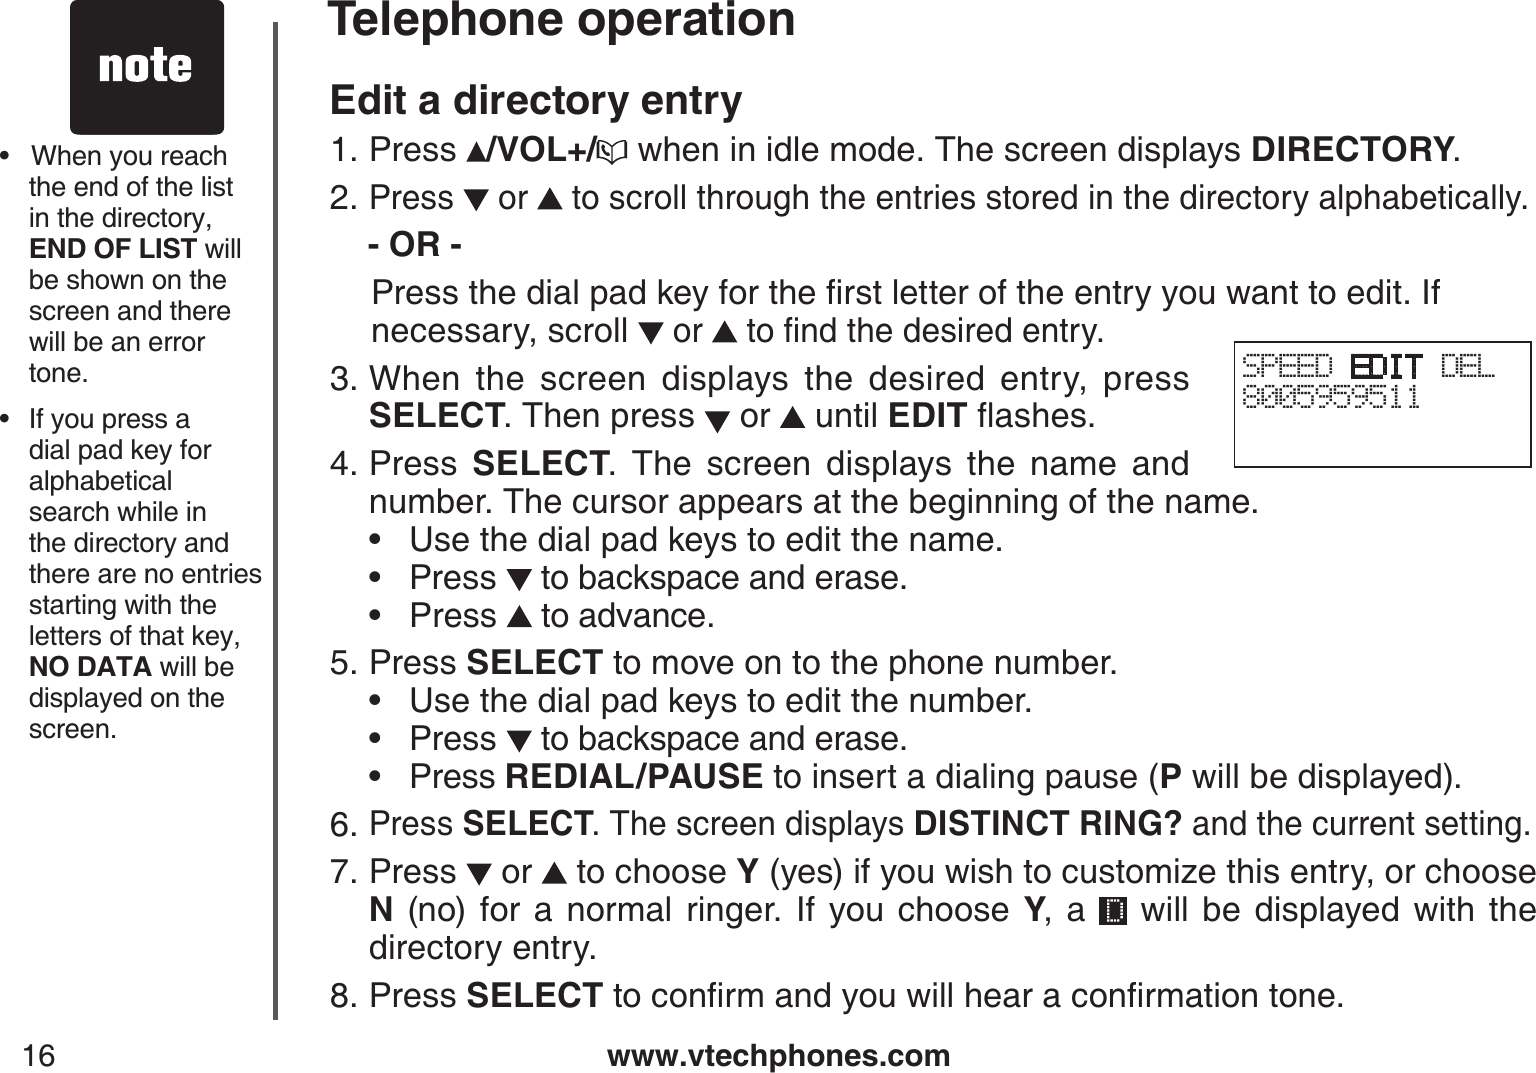 www.vtechphones.com16Telephone operationEdit a directory entryPress  /VOL+/ when in idle mode. The screen displays DIRECTORY.Press   or   to scroll through the entries stored in the directory alphabetically.   - OR - 2TGUUVJGFKCNRCFMG[HQTVJGſTUVNGVVGTQHVJGGPVT[[QWYCPVVQGFKV+H   necessary, scroll  or  VQſPFVJGFGUKTGFGPVT[When the screen displays the desired entry, press SELECT. Then press   or   until EDITƀCUJGUPress  SELECT. The screen displays the name and number. The cursor appears at the beginning of the name.     • Use the dial pad keys to edit the name.         • Press   to backspace and erase.          • Press  to advance.   Press SELECT to move on to the phone number.       • Use the dial pad keys to edit the number.         • Press   to backspace and erase.           • Press REDIAL/PAUSE to insert a dialing pause (P will be displayed).Press SELECT. The screen displays DISTINCT RING? and the current setting.Press   or   to choose Y (yes) if you wish to customize this entry, or choose N (no) for a normal ringer. If you choose Y, a   will be displayed with the directory entry.Press SELECTVQEQPſTOCPF[QWYKNNJGCTCEQPſTOCVKQPVQPG1.2.3.4.5.6.7.8.•   When you reach the end of the list in the directory, END OF LIST will be shown on the screen and there will be an error tone.•   If you press a dial pad key for alphabetical search while inthe directory and there are no entries starting with the letters of that key, NO DATA will be displayed on the screen.SPEED EDIT DEL8005959511